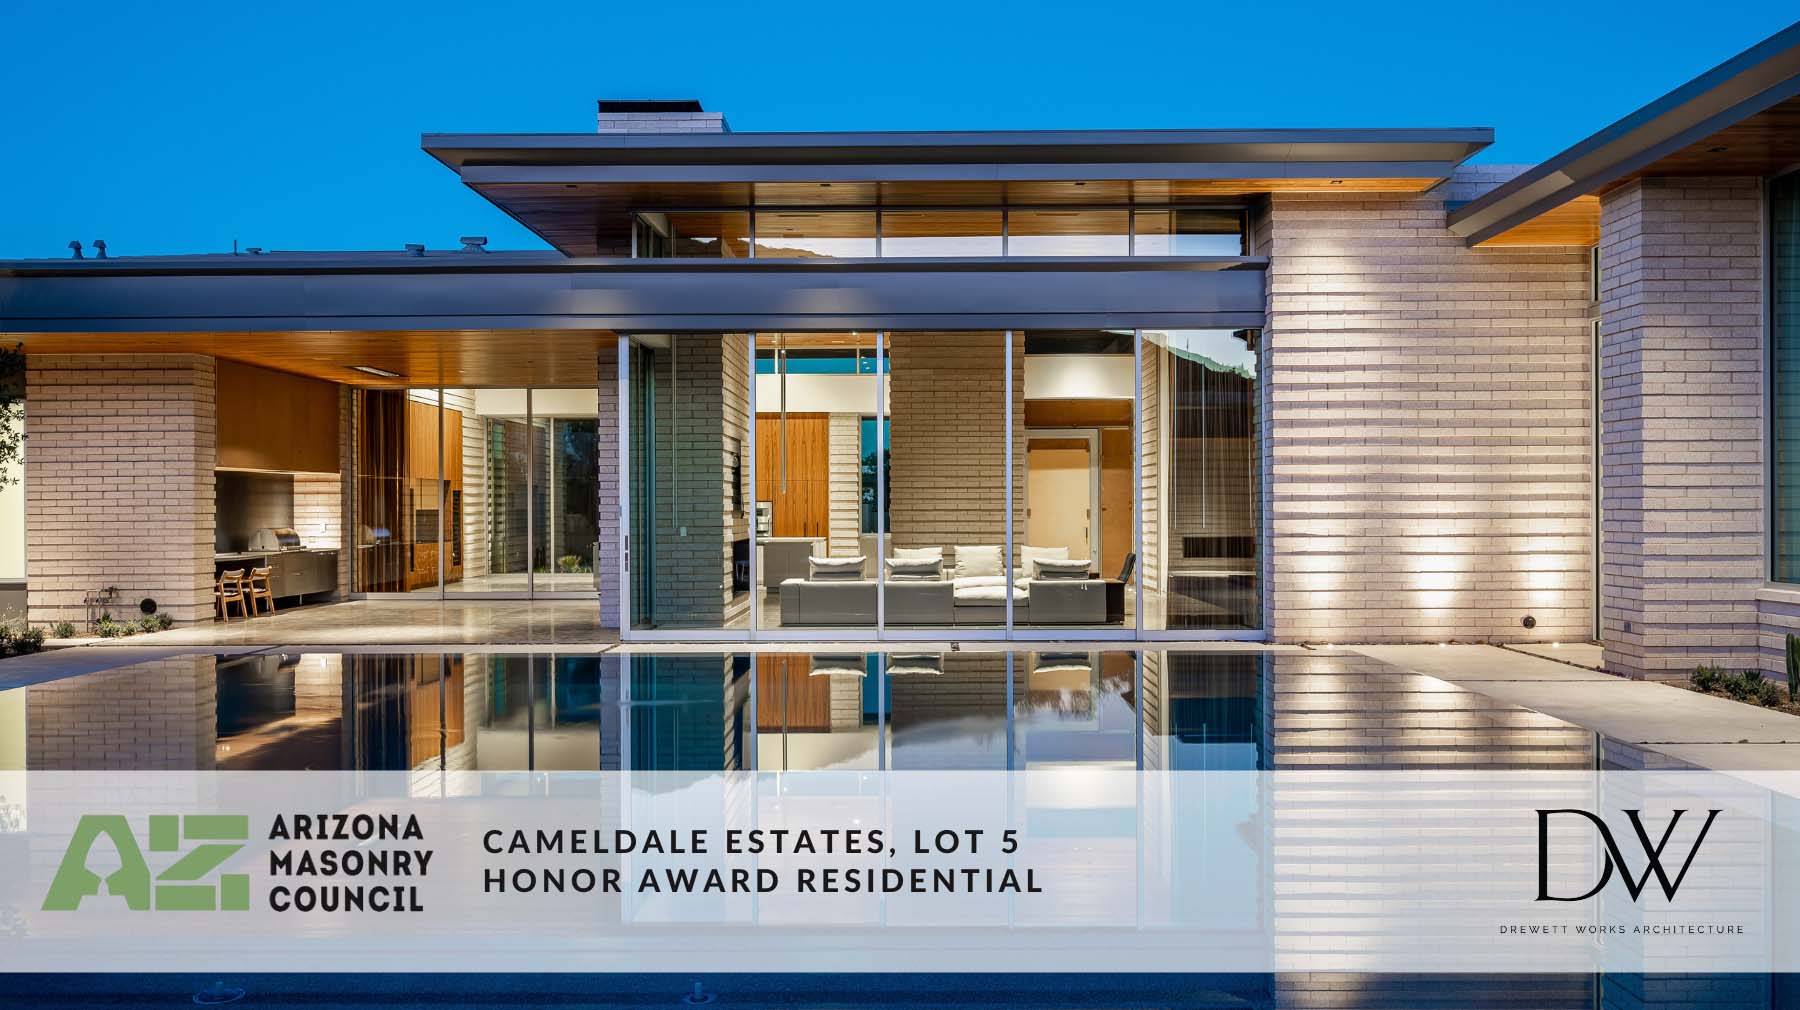 Excellence in Masonry 23 feature 1 Located in Scottsdale Ariz Drewett Works is an award winning architecture firm specializing in luxury residential hospitality and commercial architecture